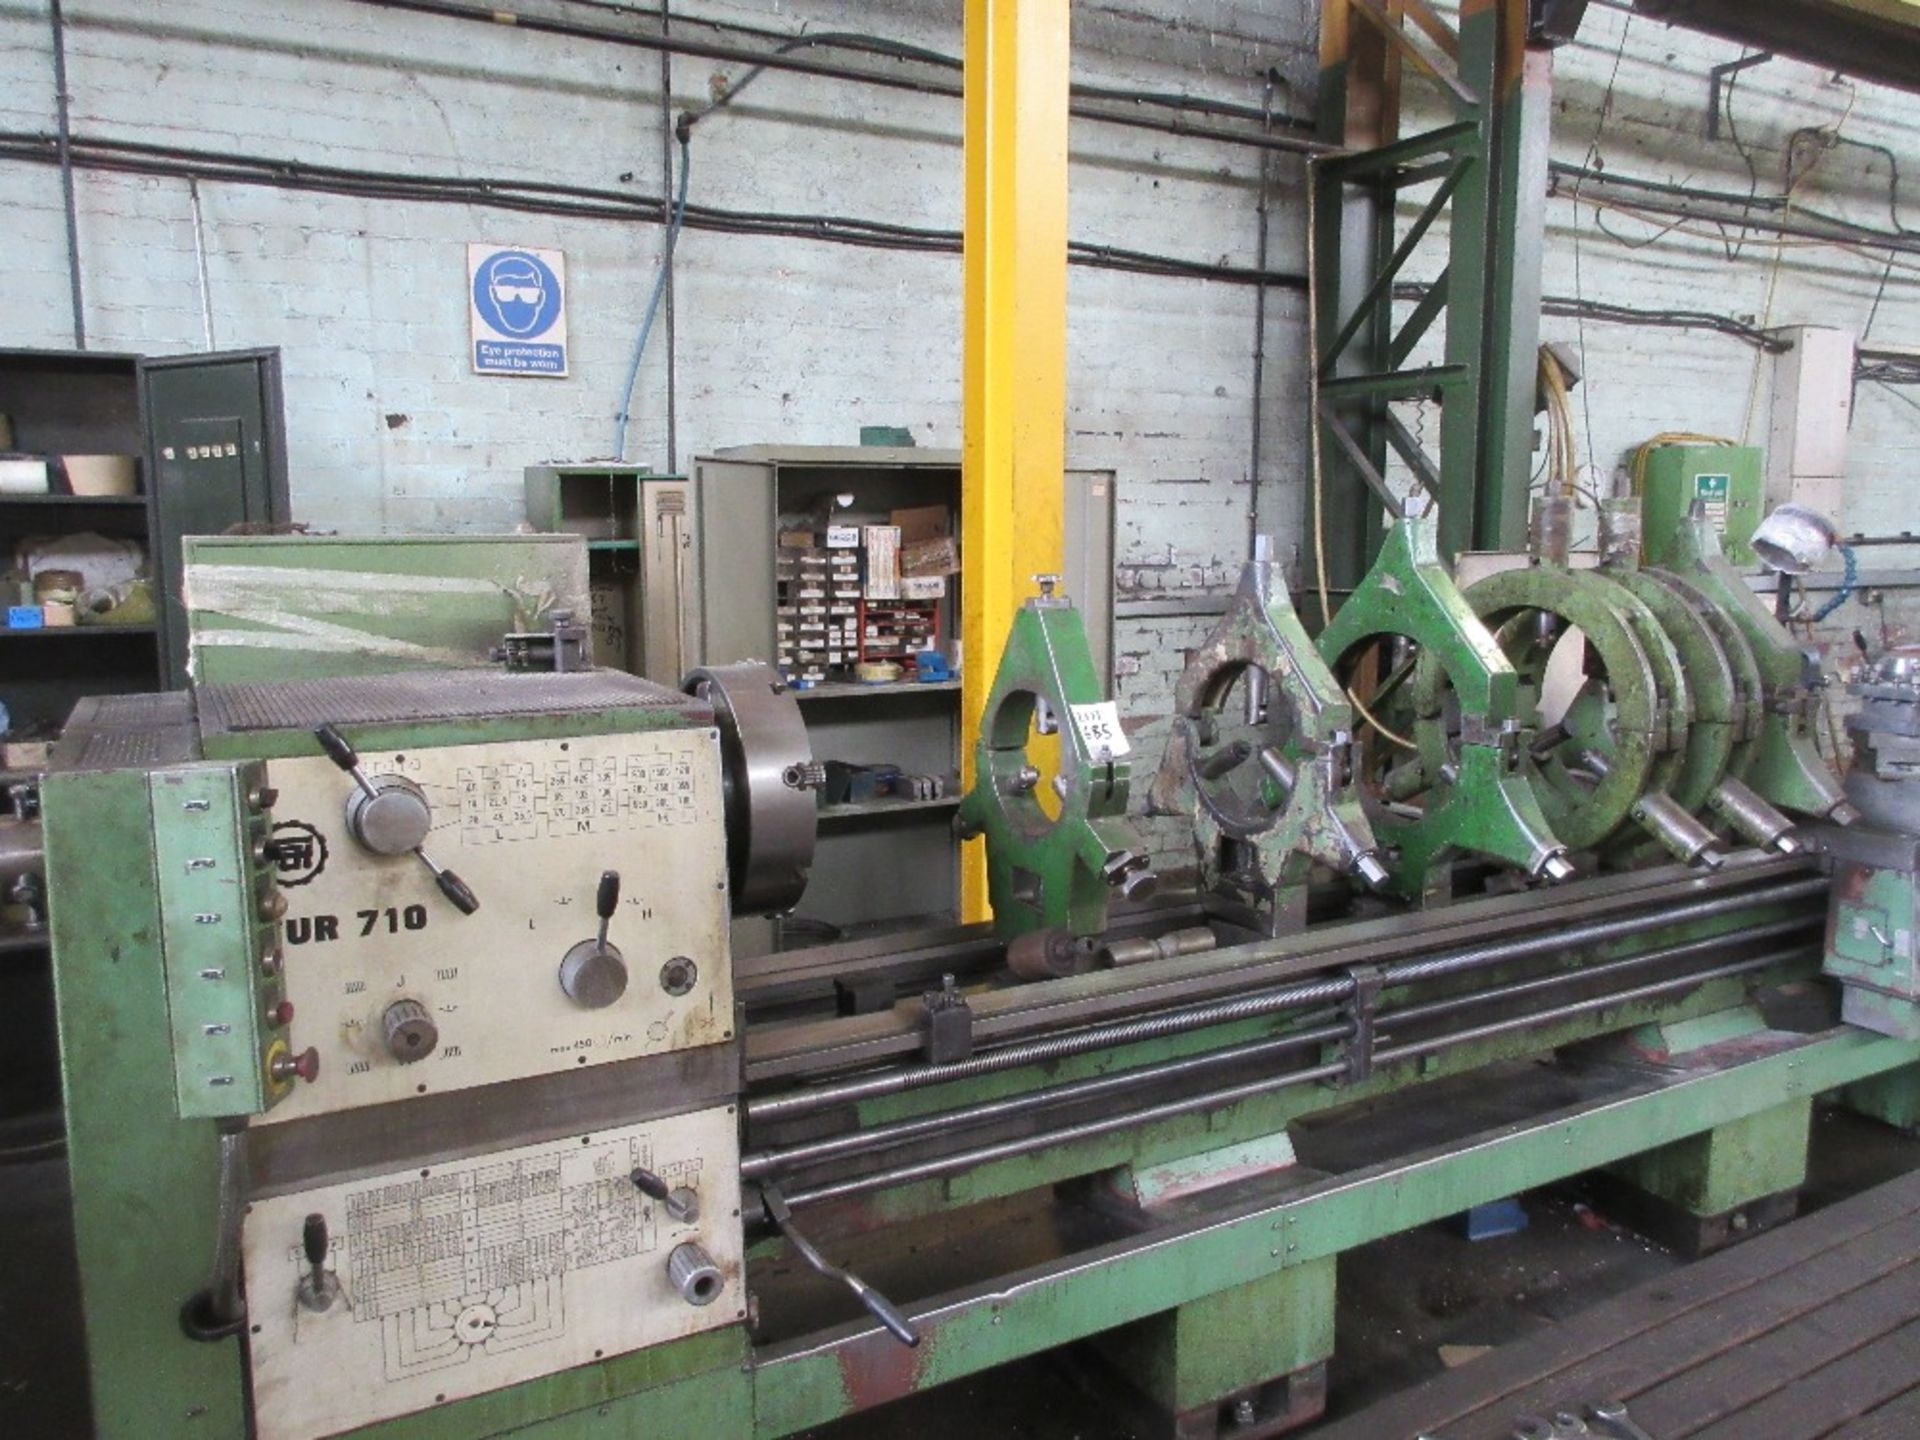 Tarnow TUR710 centre lathe 450mm swing x 3000mm centres with 6 various steadies. Machine No. 5046.